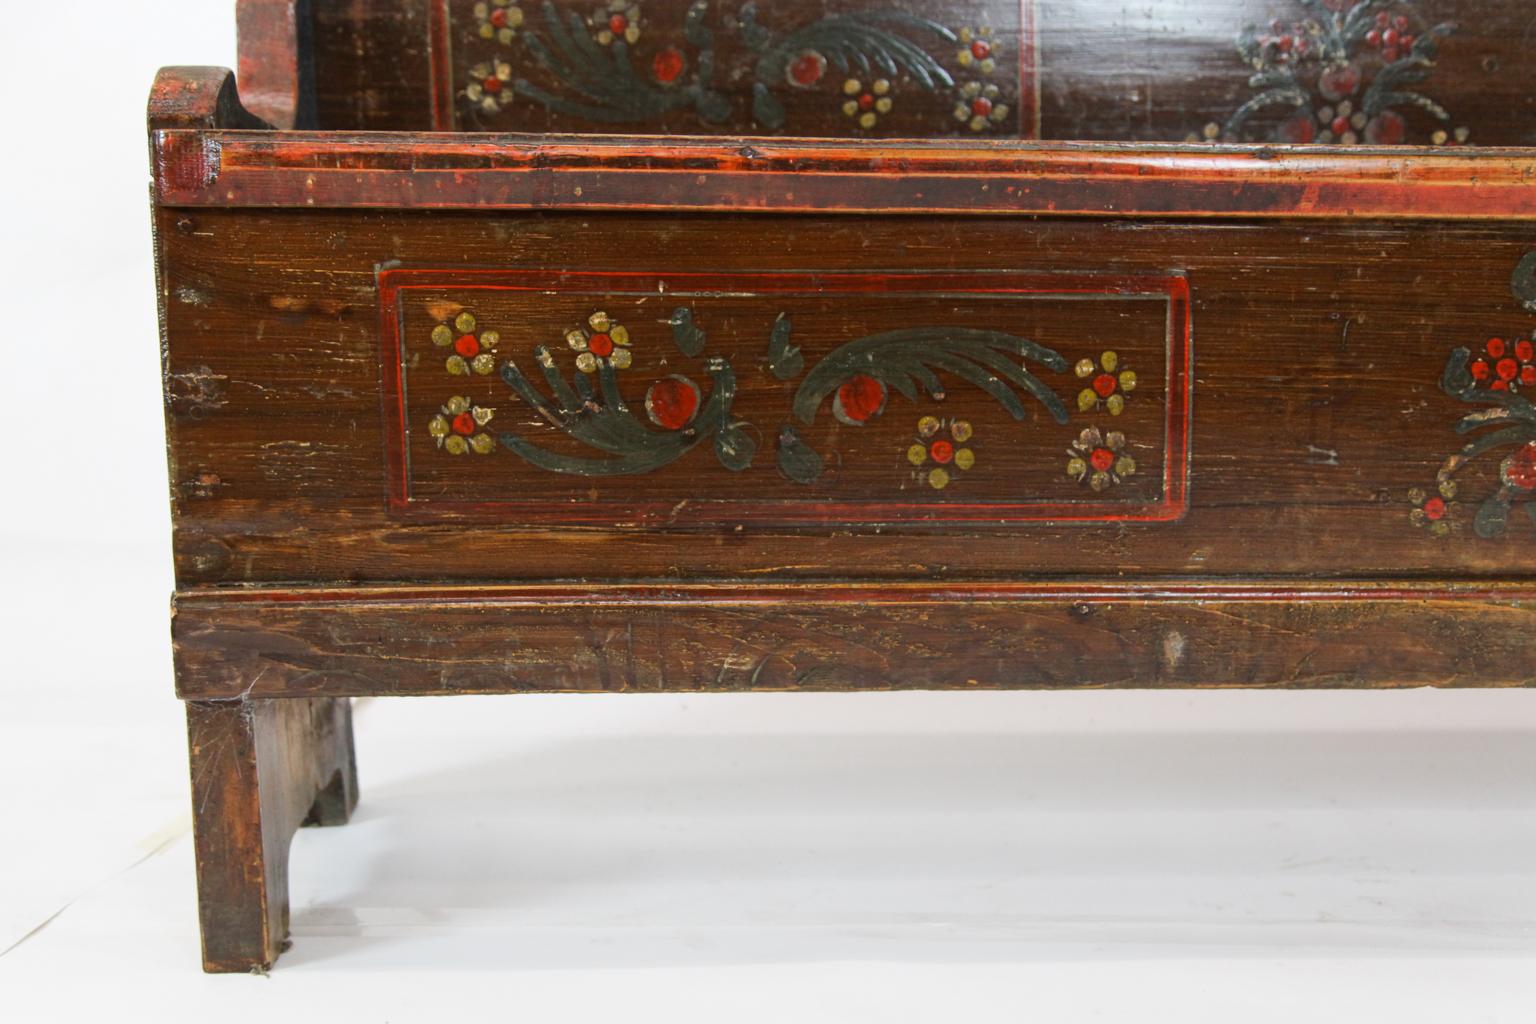 19th century long painted pine lift top bench, with double lift top seats, the back, seat and front painted with stylized flowers and foliate.